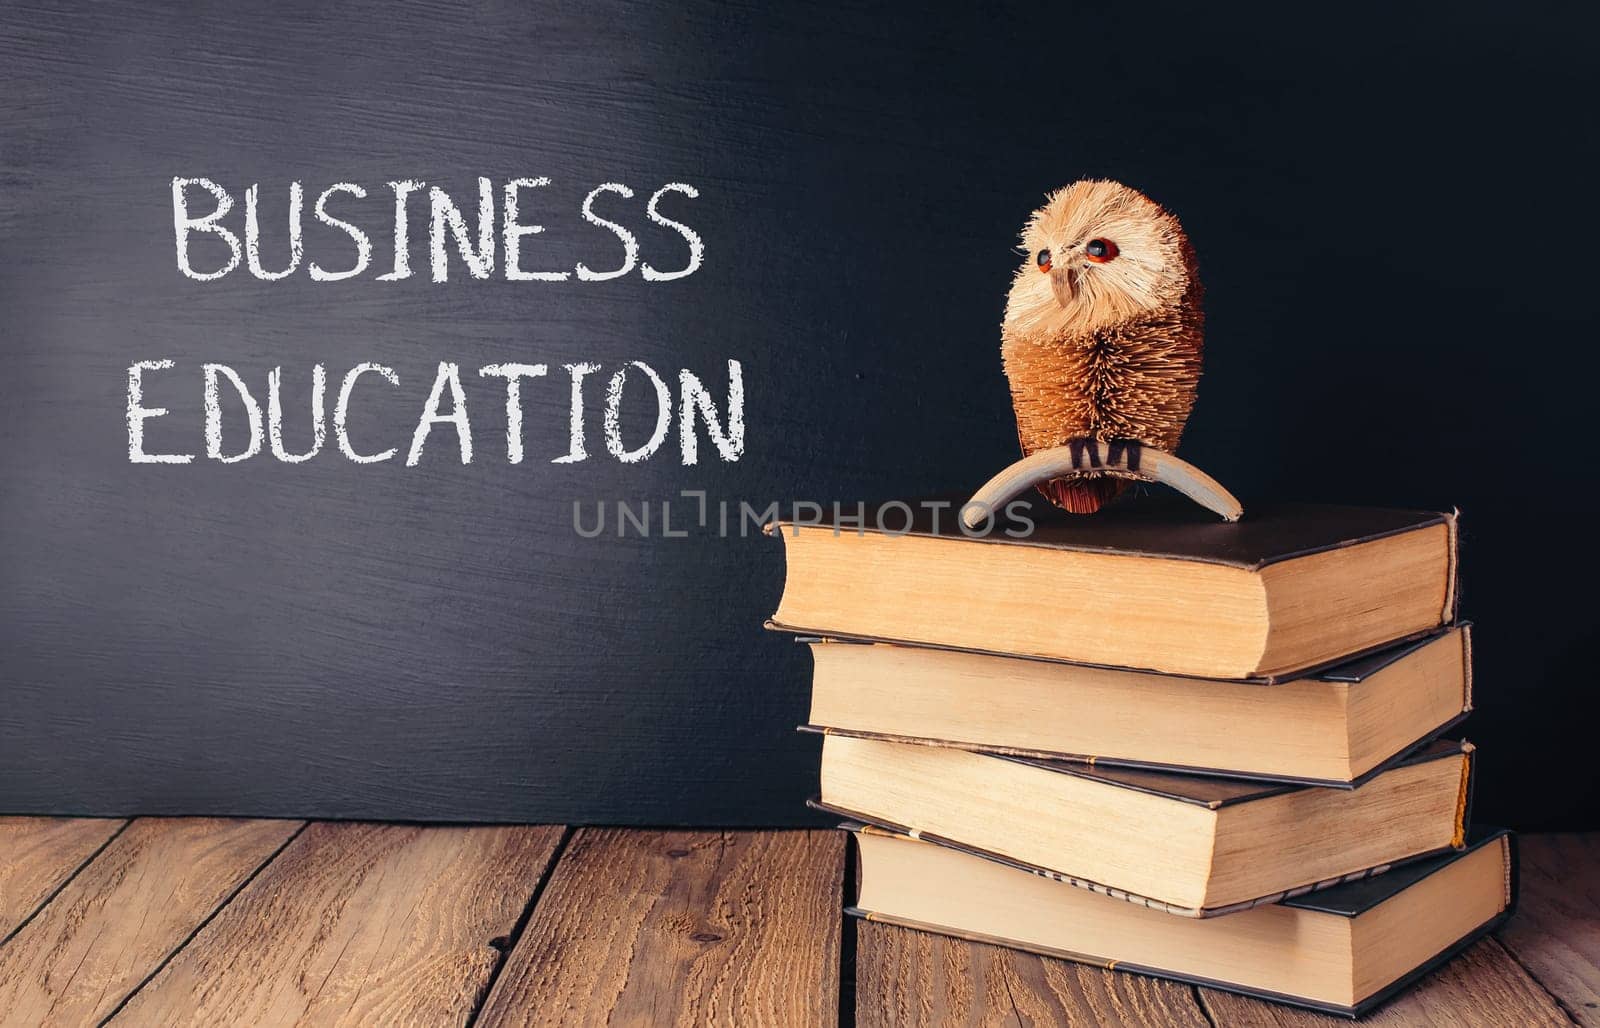 A small owl is sitting on top of a stack of books. The books are titled Business Education